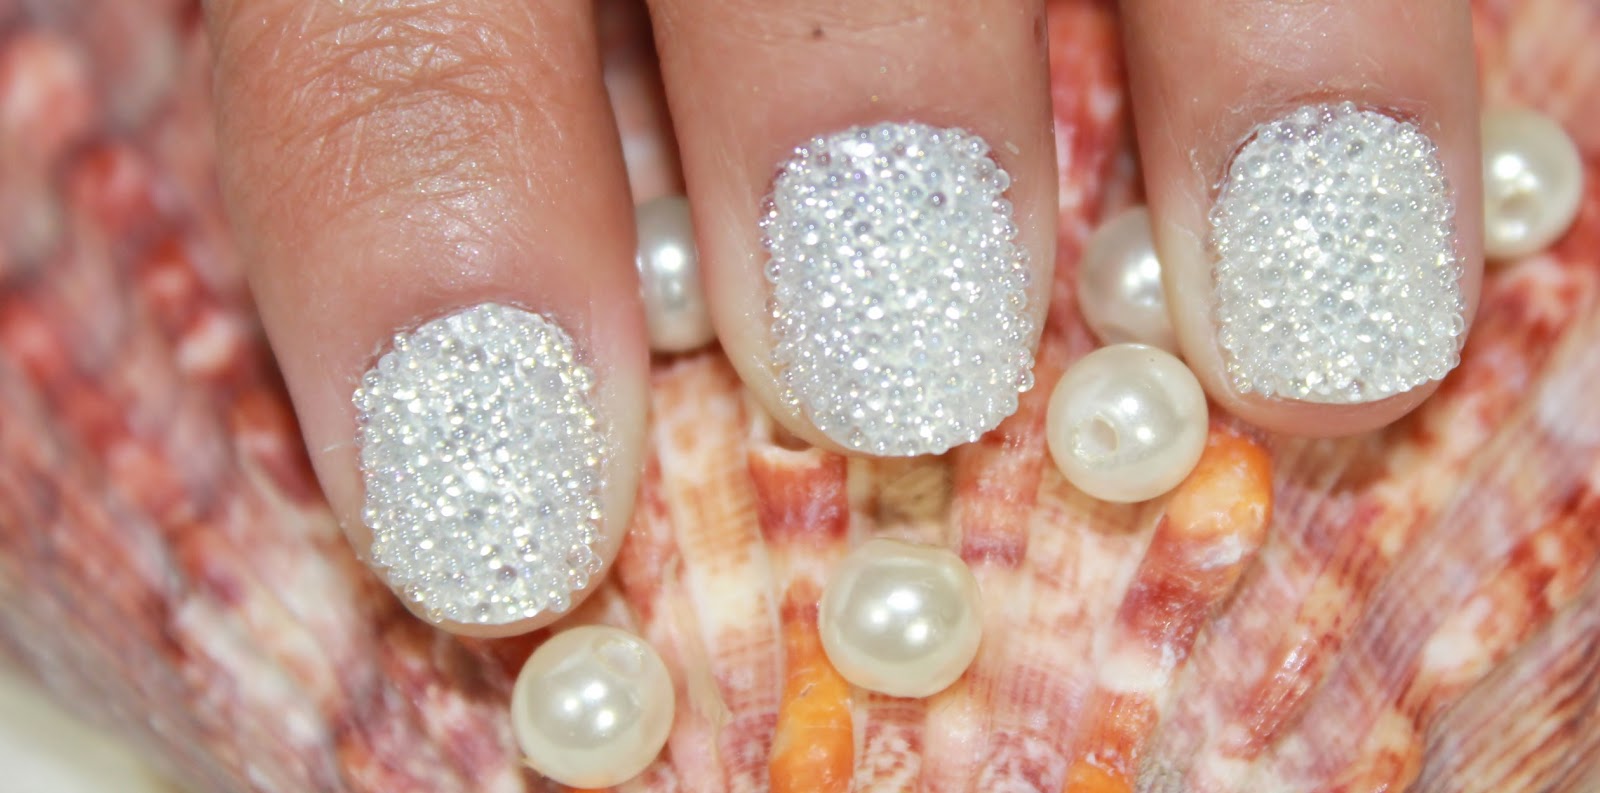 4. Pinterest: Pearl Nails - wide 4